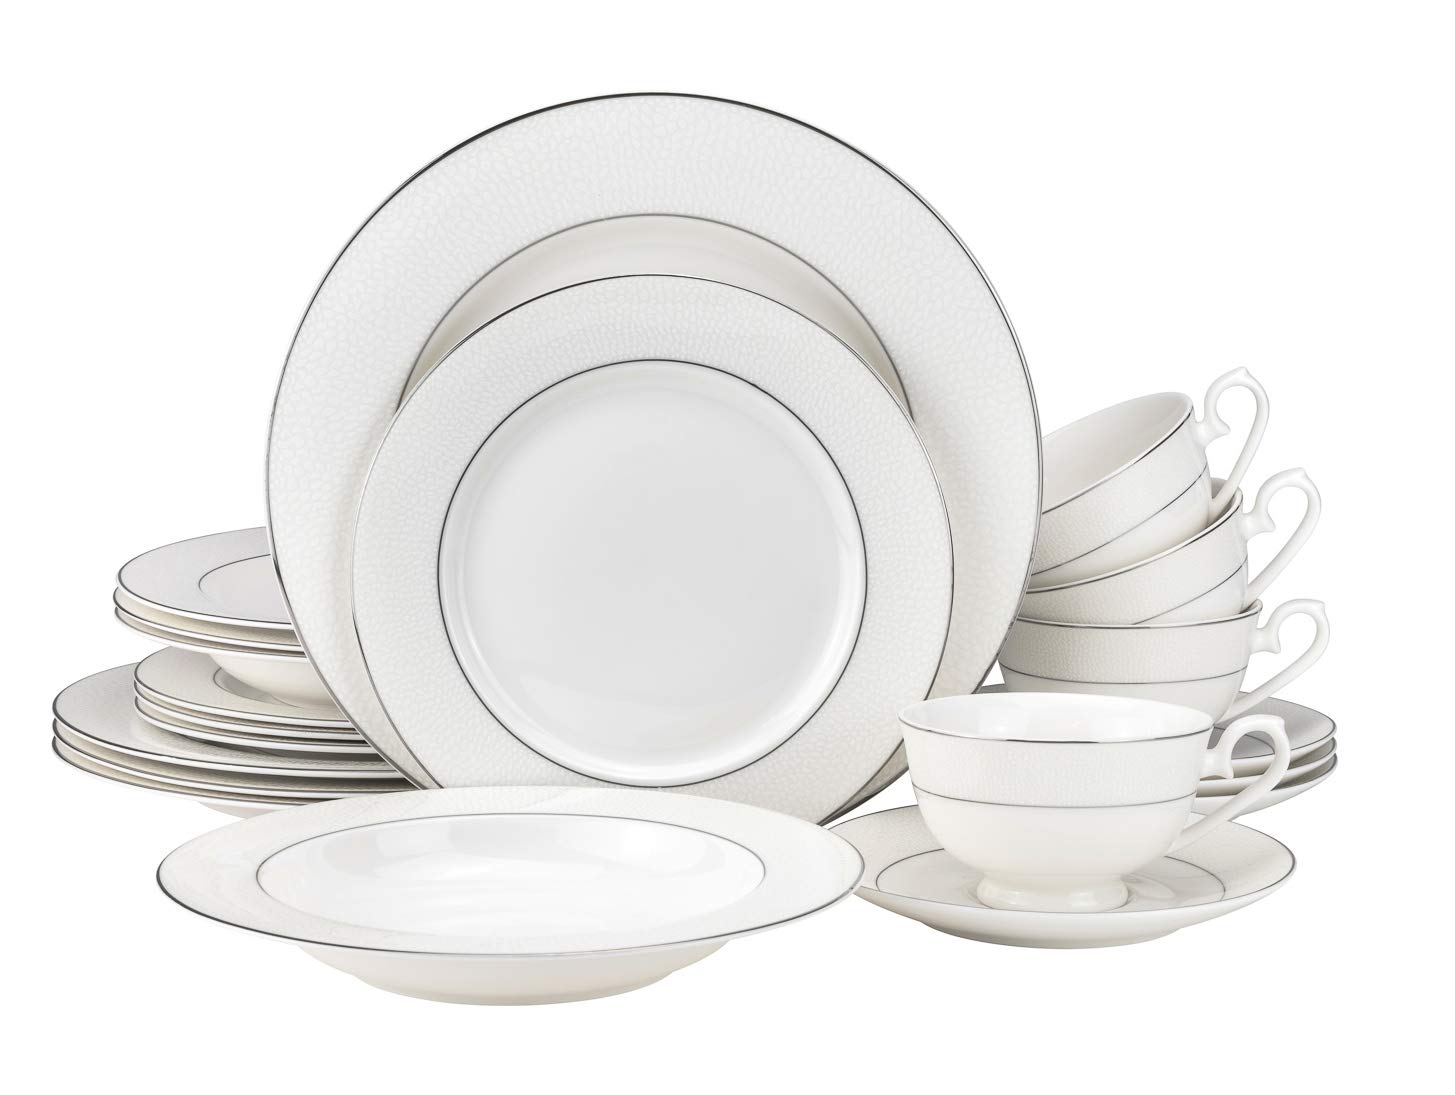 20-pc. Dinner Set Service for 4, 24K Gold-plated Luxury Bone China Tableware ("Maria" 6832P) - image 1 of 3